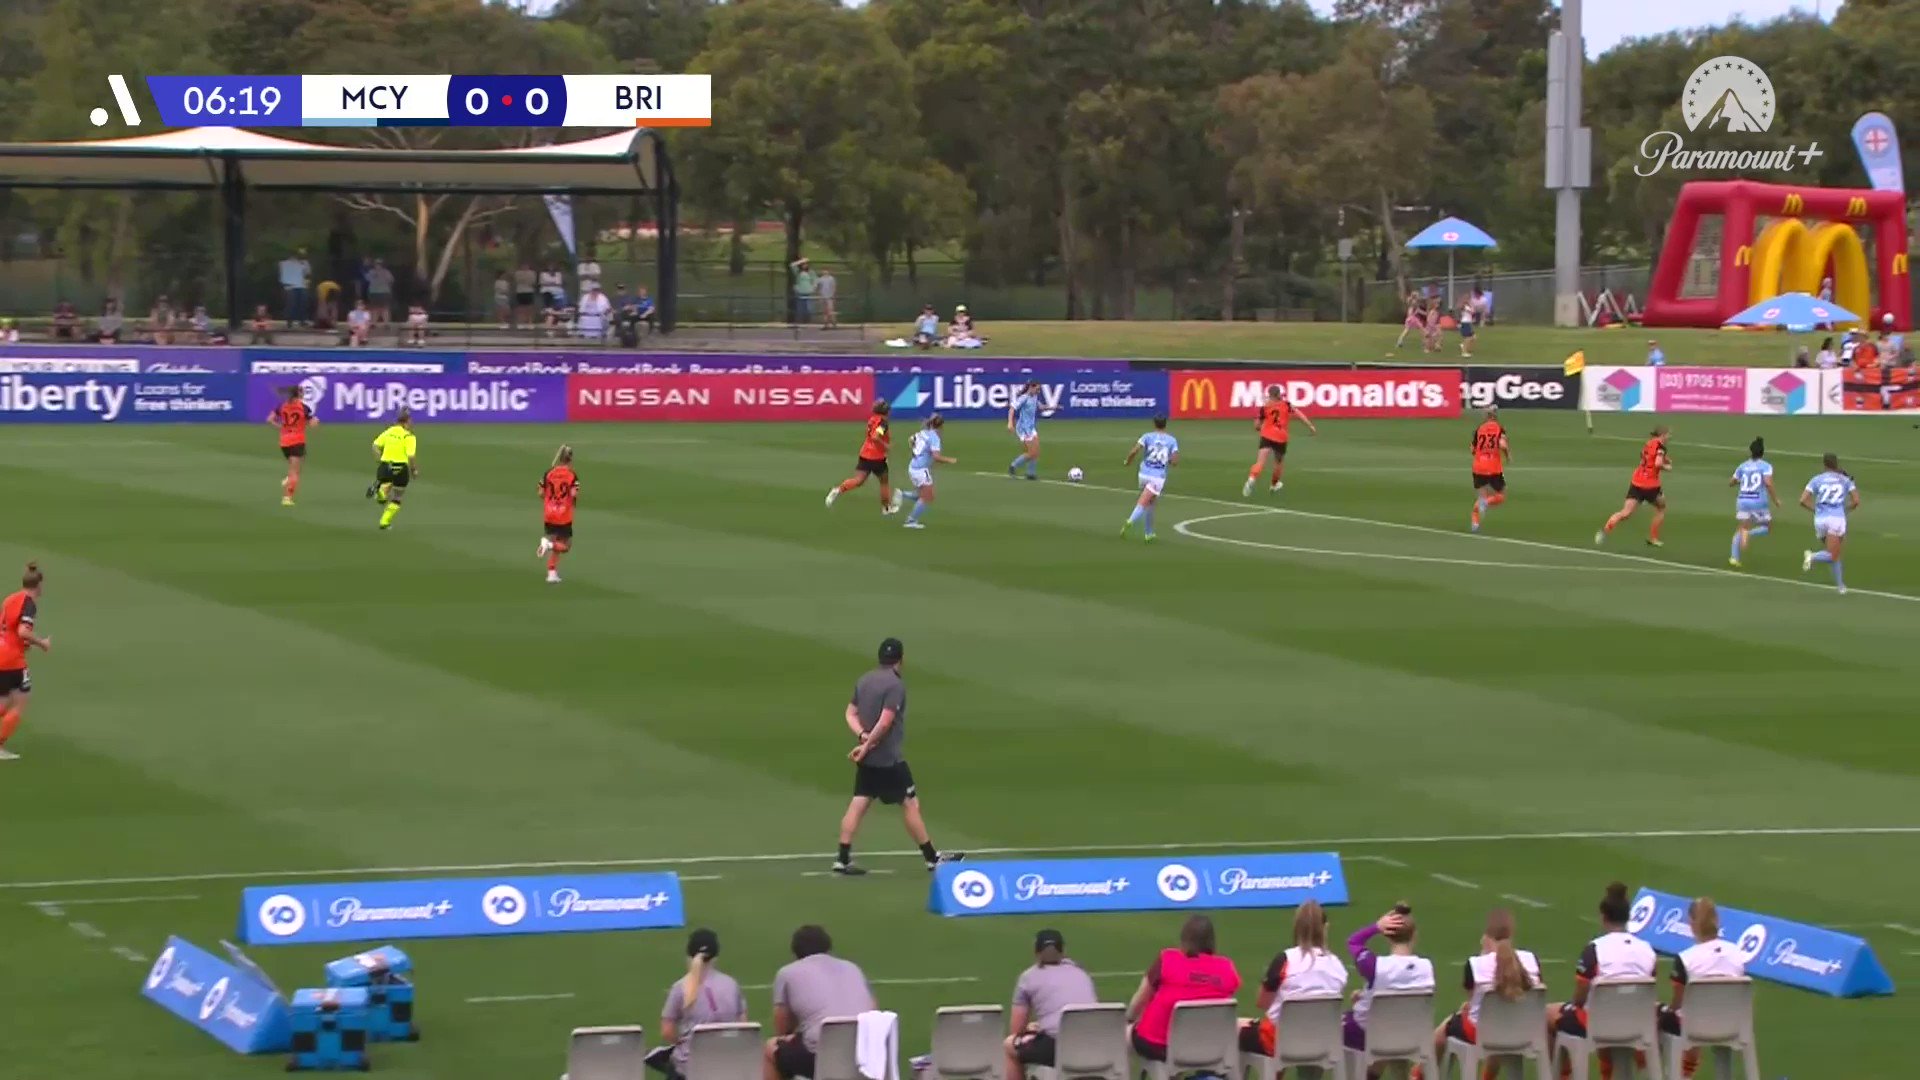 HOW DID THAT NOT GO IN?!?! 😱

Chaos at Casey Fields between @MelbourneCity & @brisbaneroar! 

Catch all the action LIVE on #DubZone 📺

.
.

Follow live:  @LibFinancial”